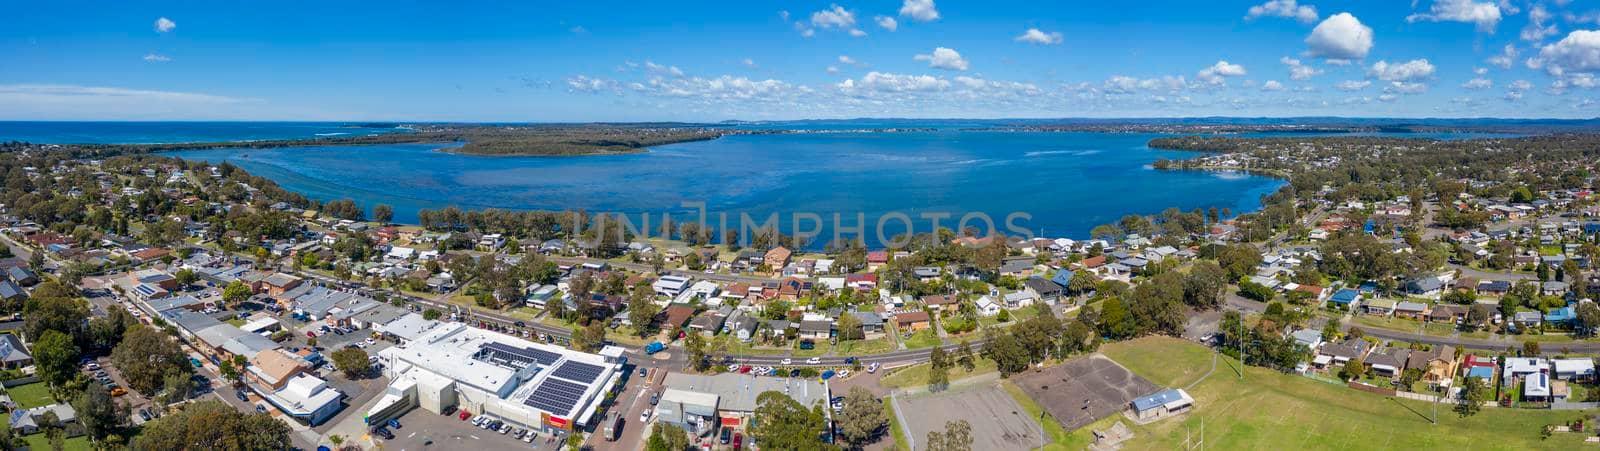 Aerial view of Lake Munmorah and the township of Budgewoi on the central coast of regional New South Wales in Australia